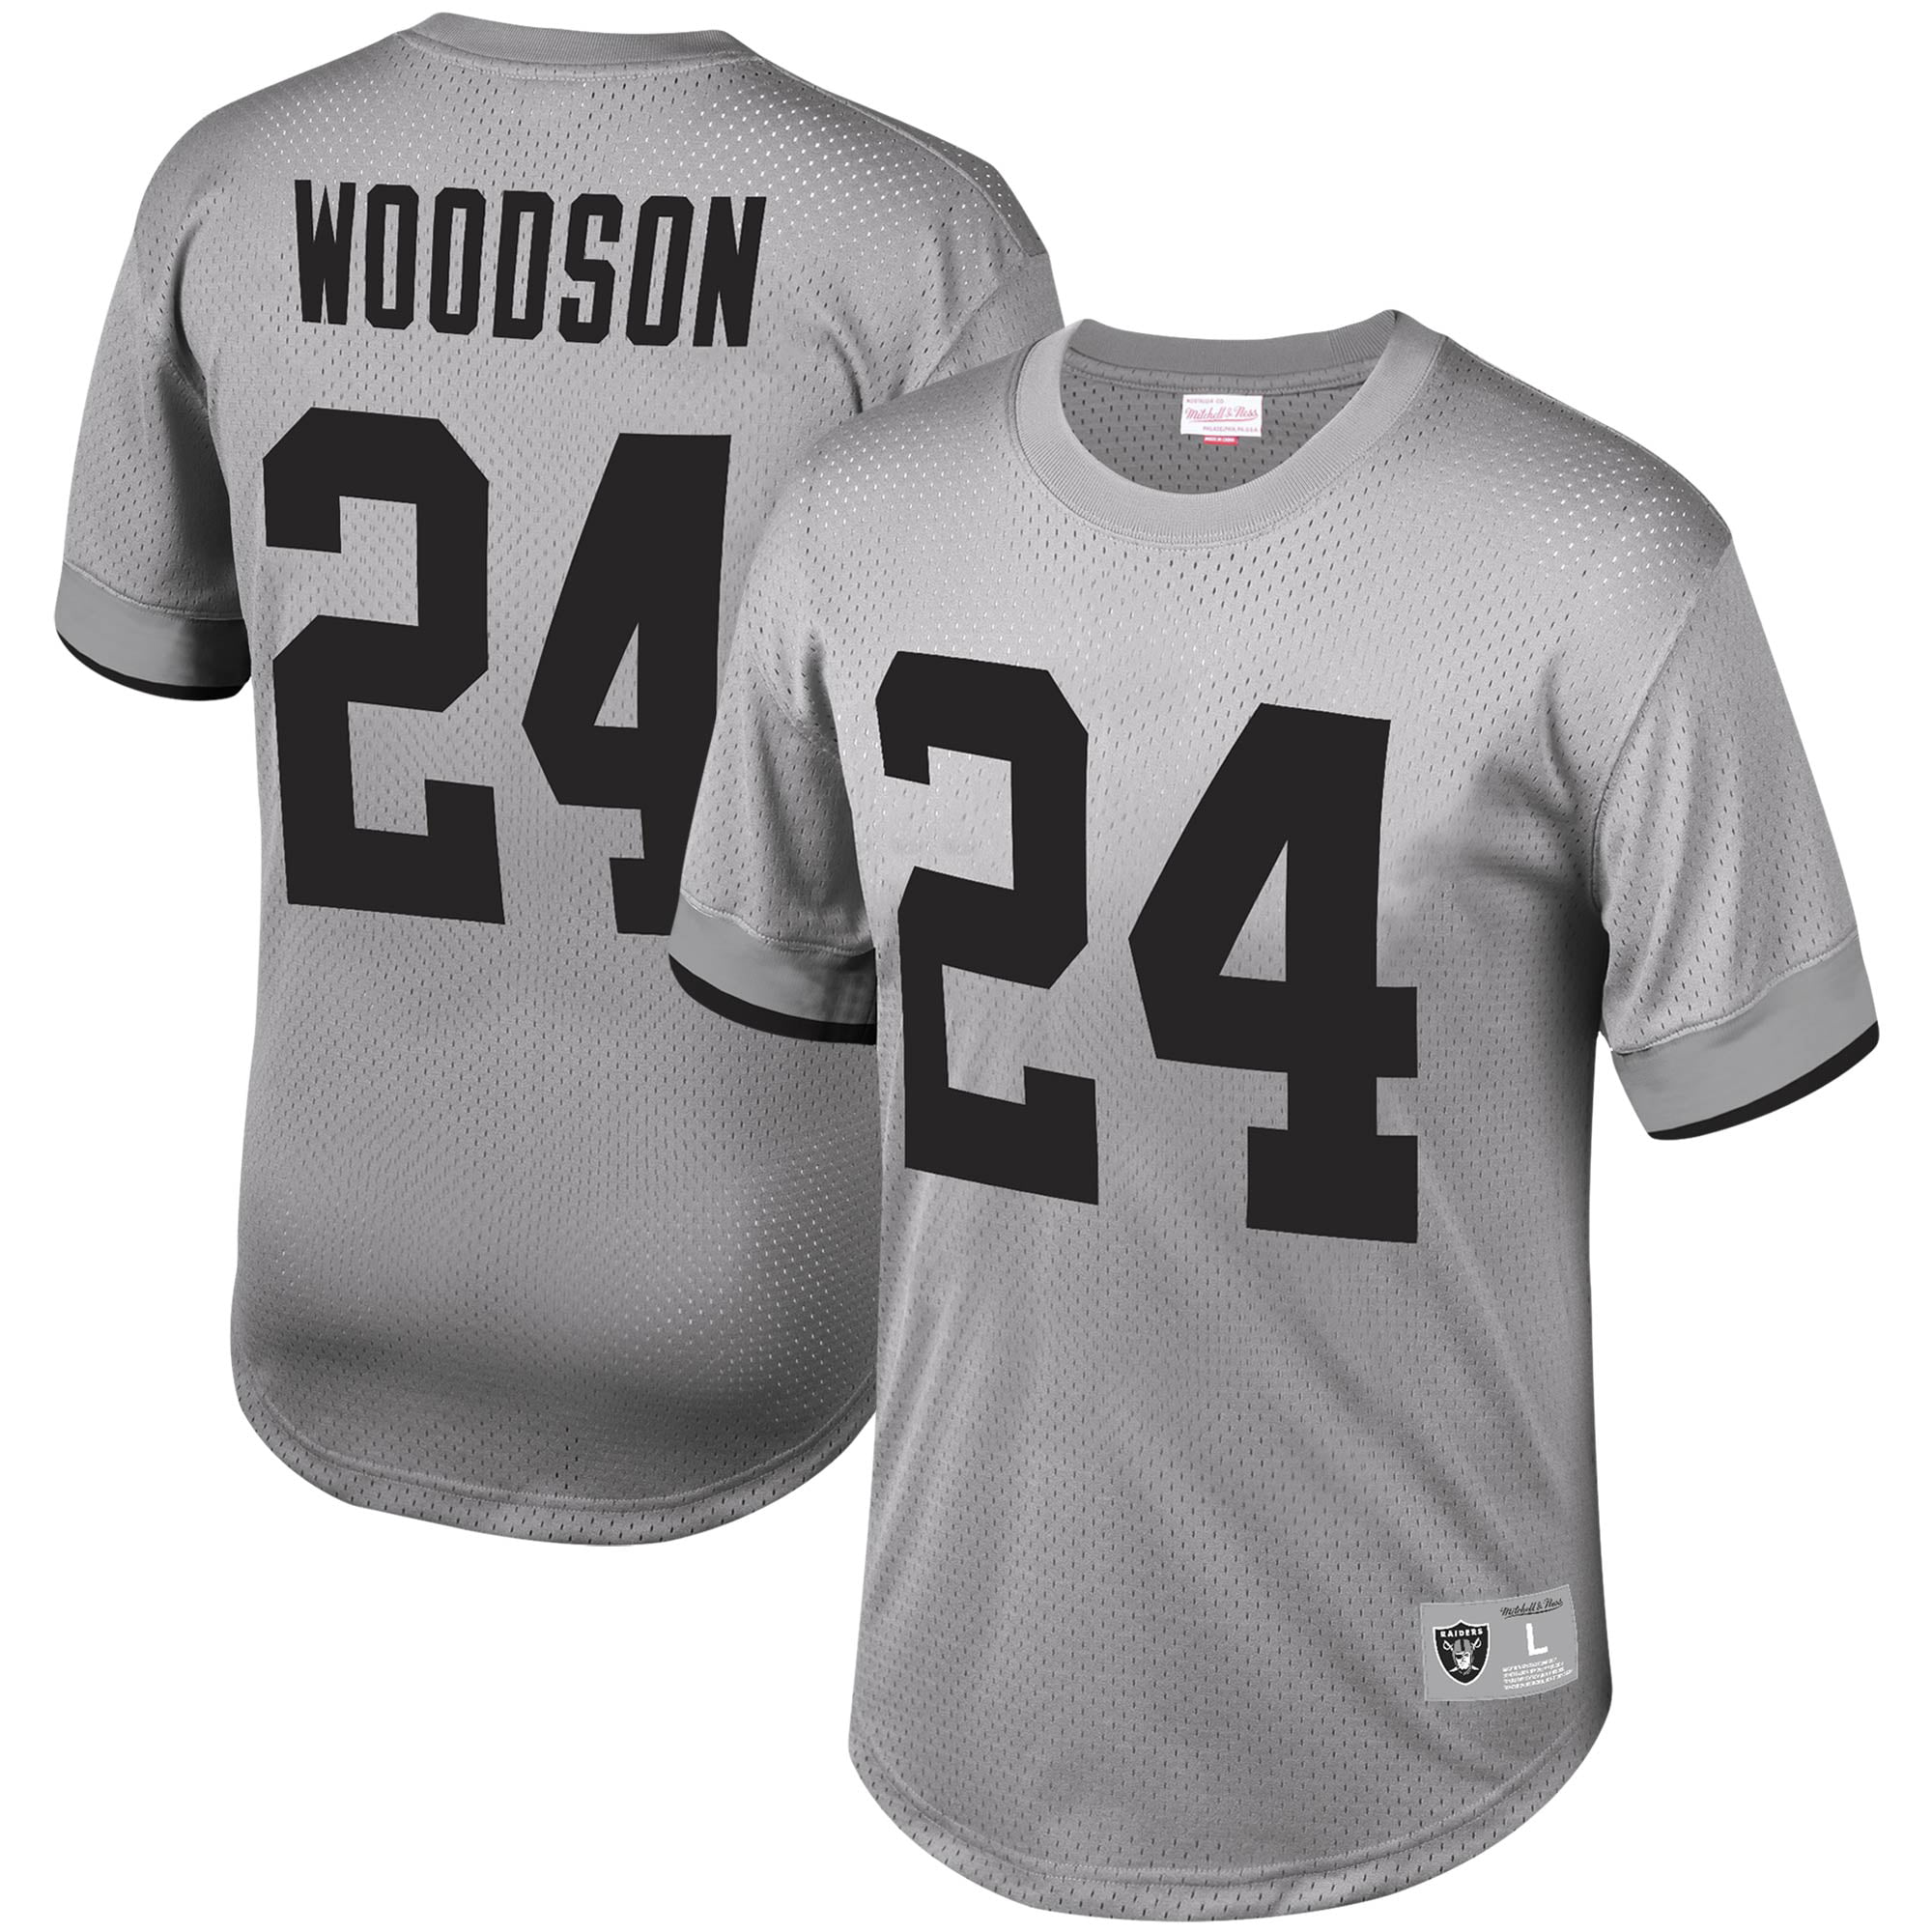 charles woodson mitchell and ness